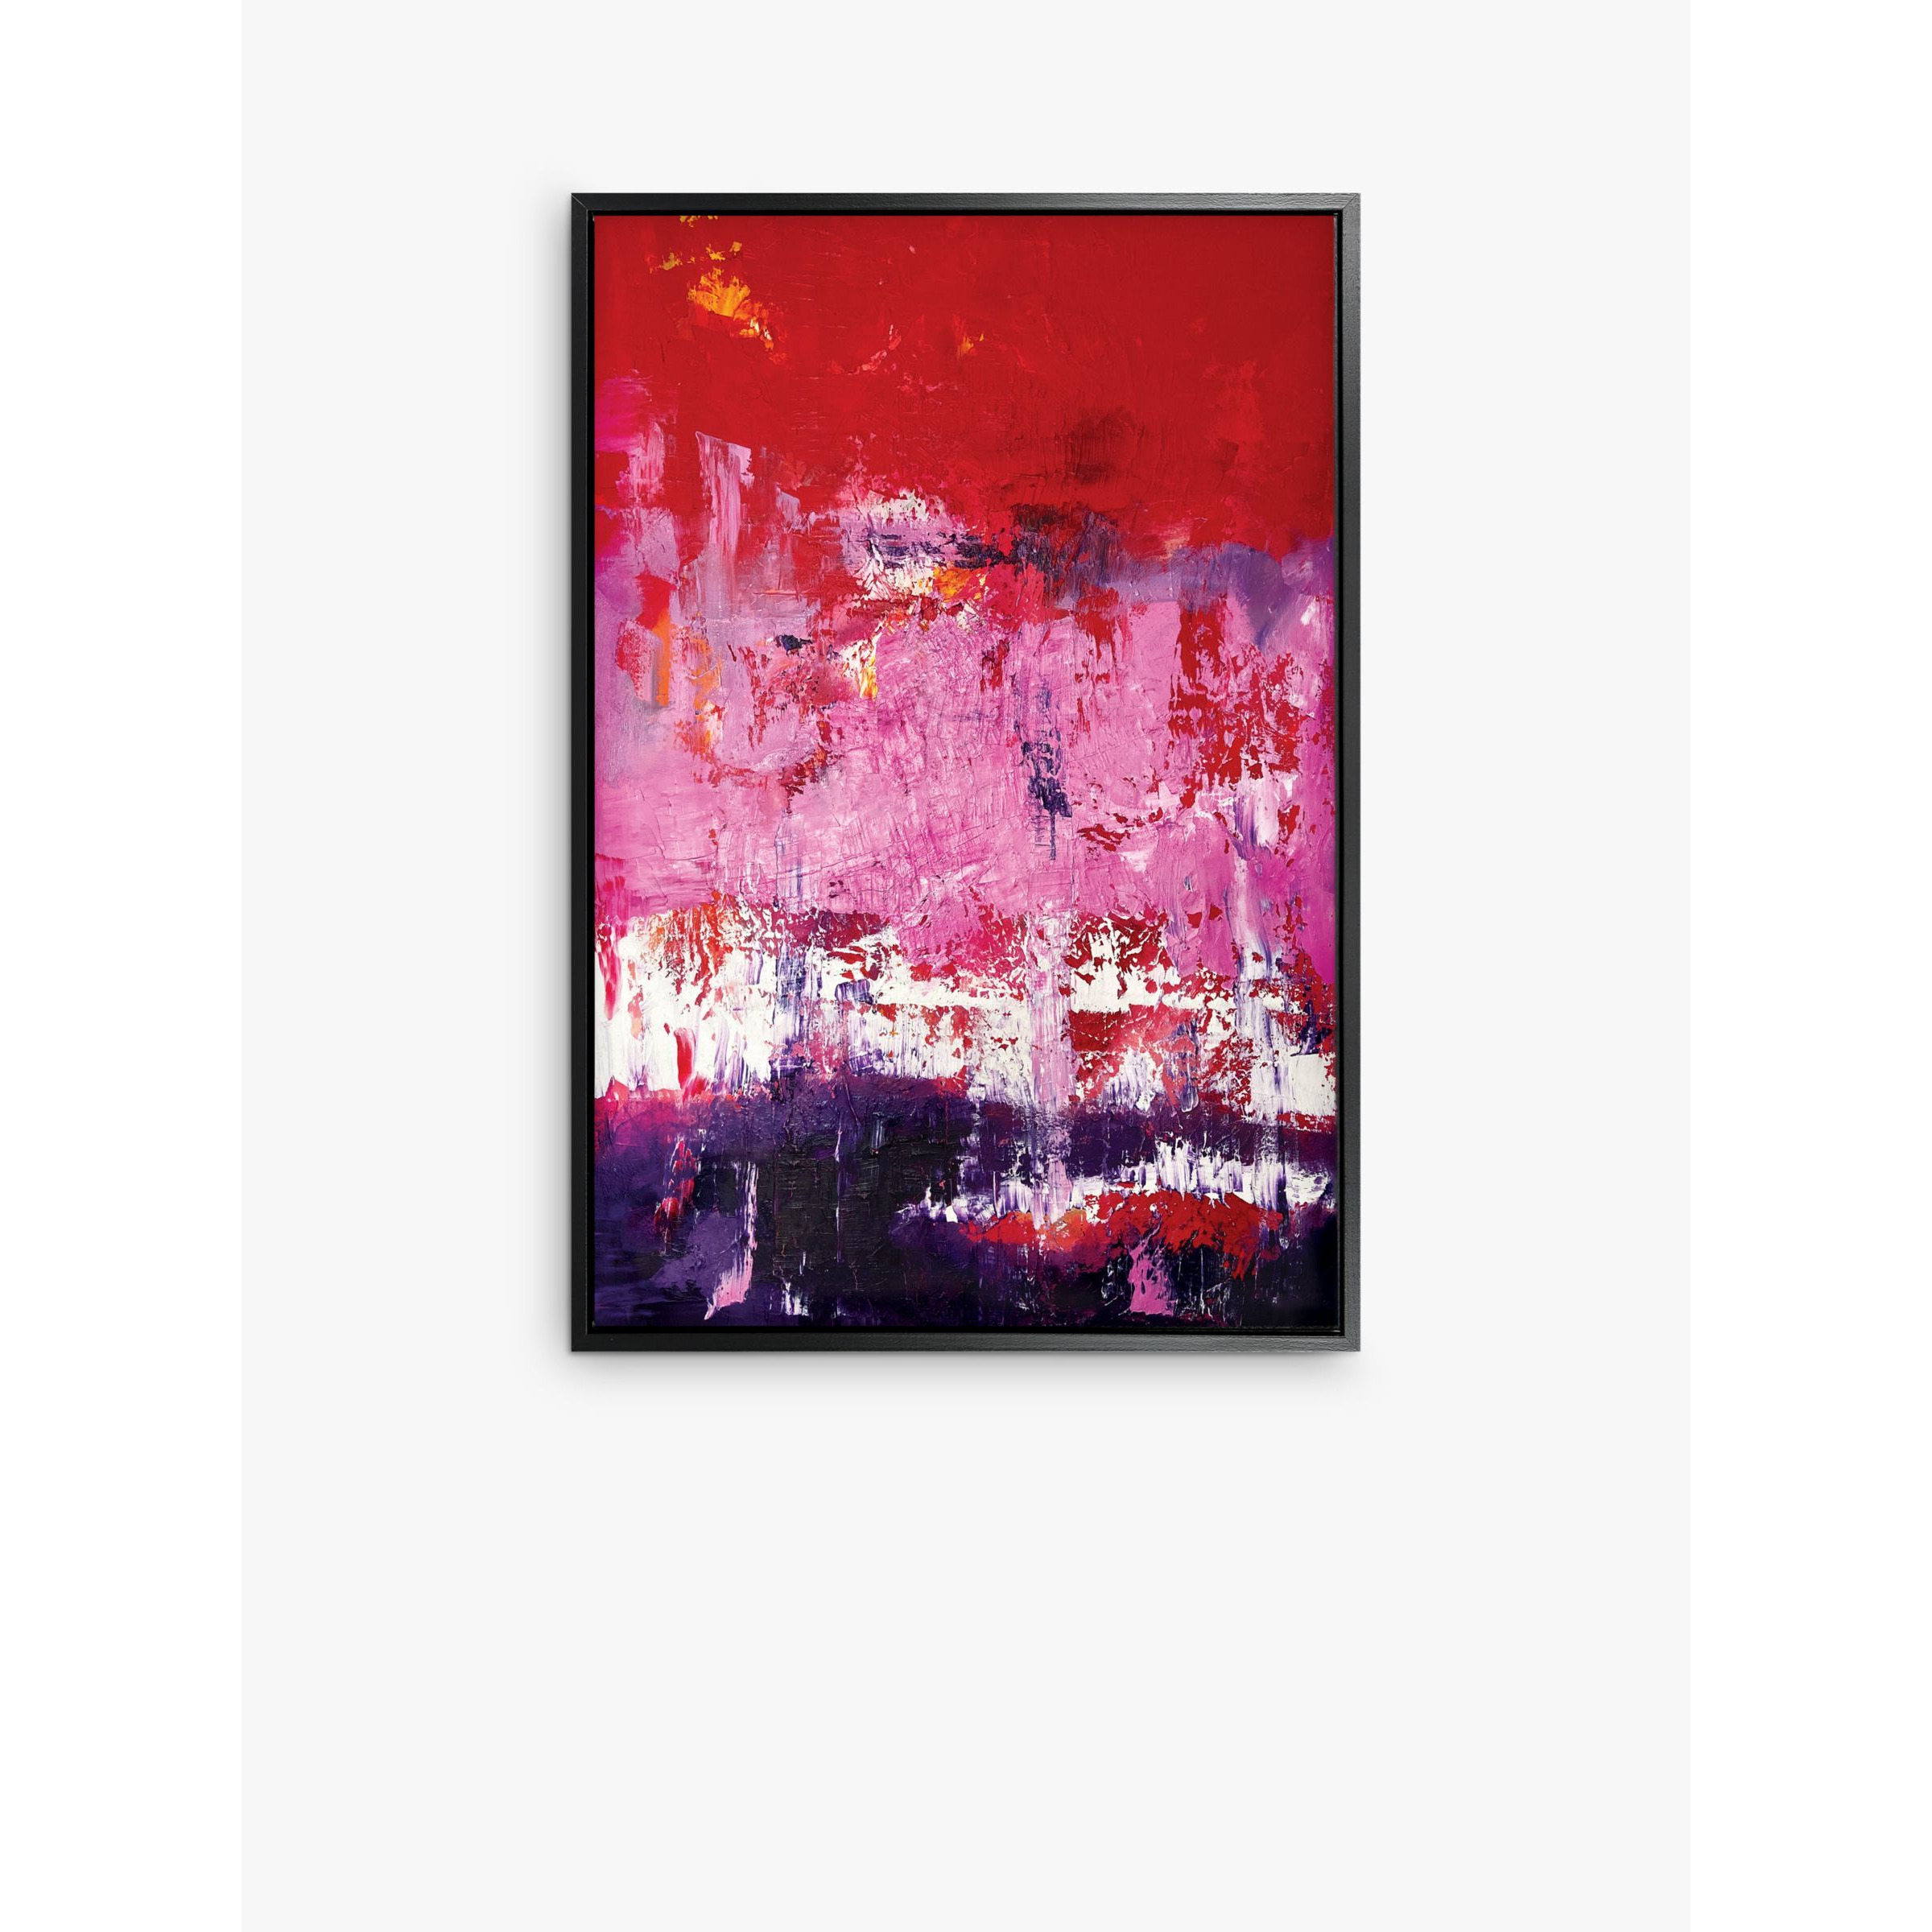 Helena Izett - 'Red Pink Purple Abstract' Framed Canvas Print, 94 x 64cm, Pink